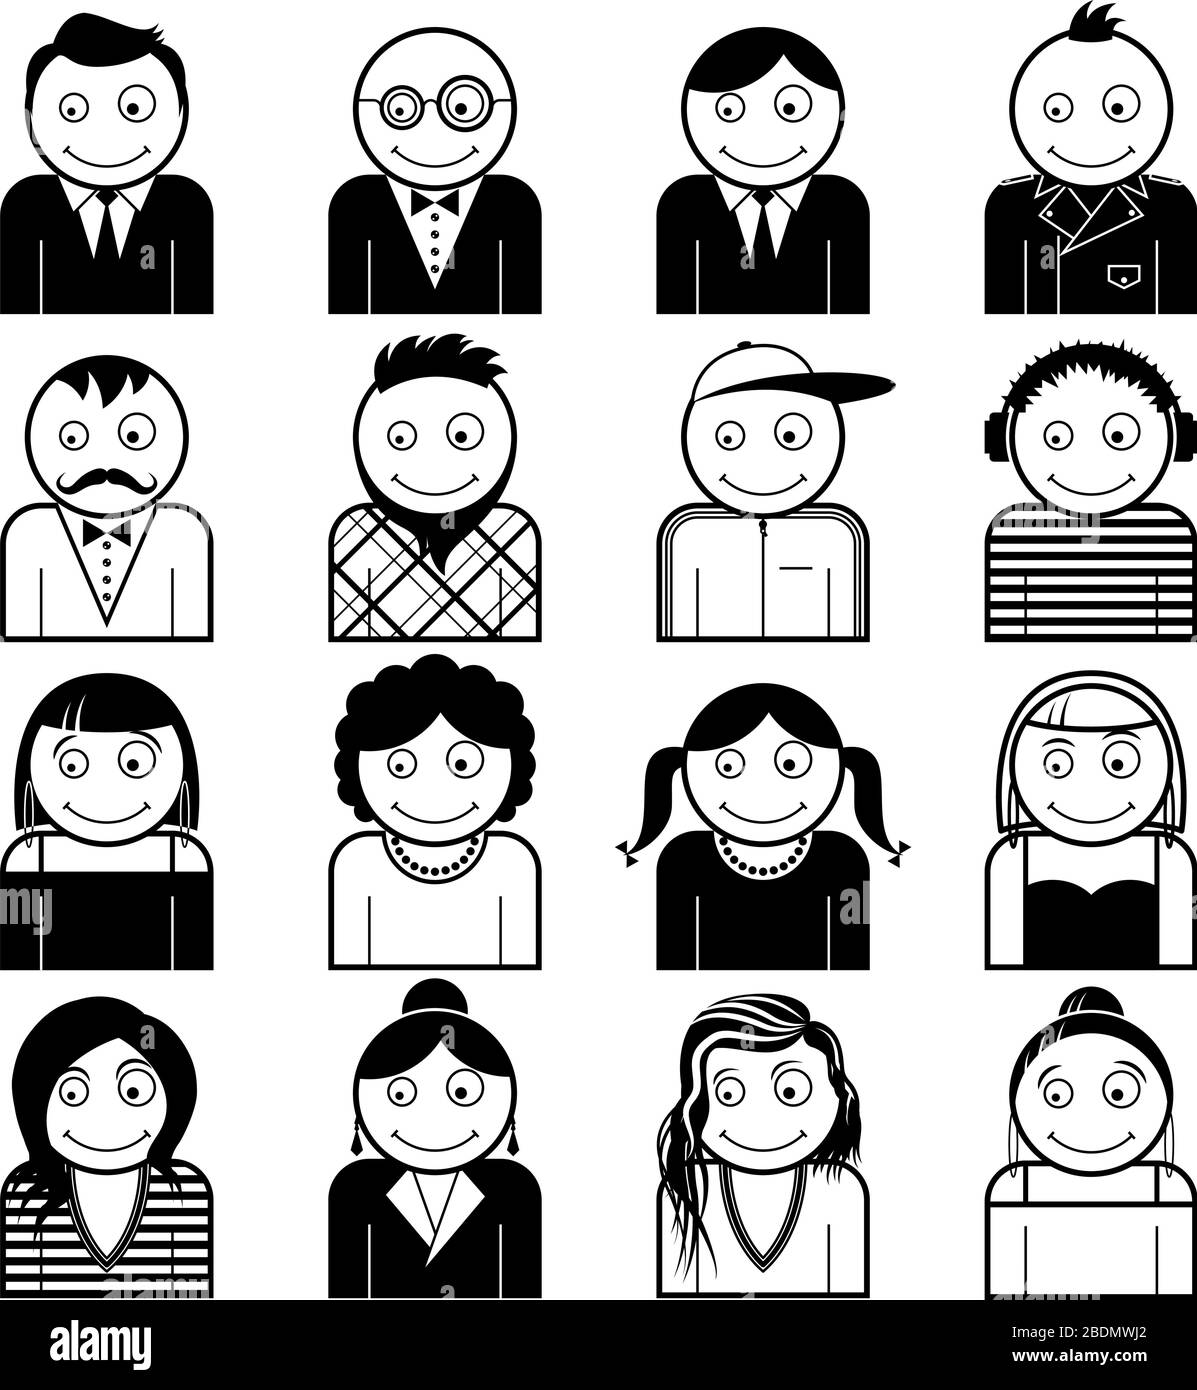 Set of vector pictograms with people/ faces/ avatars Stock Vector